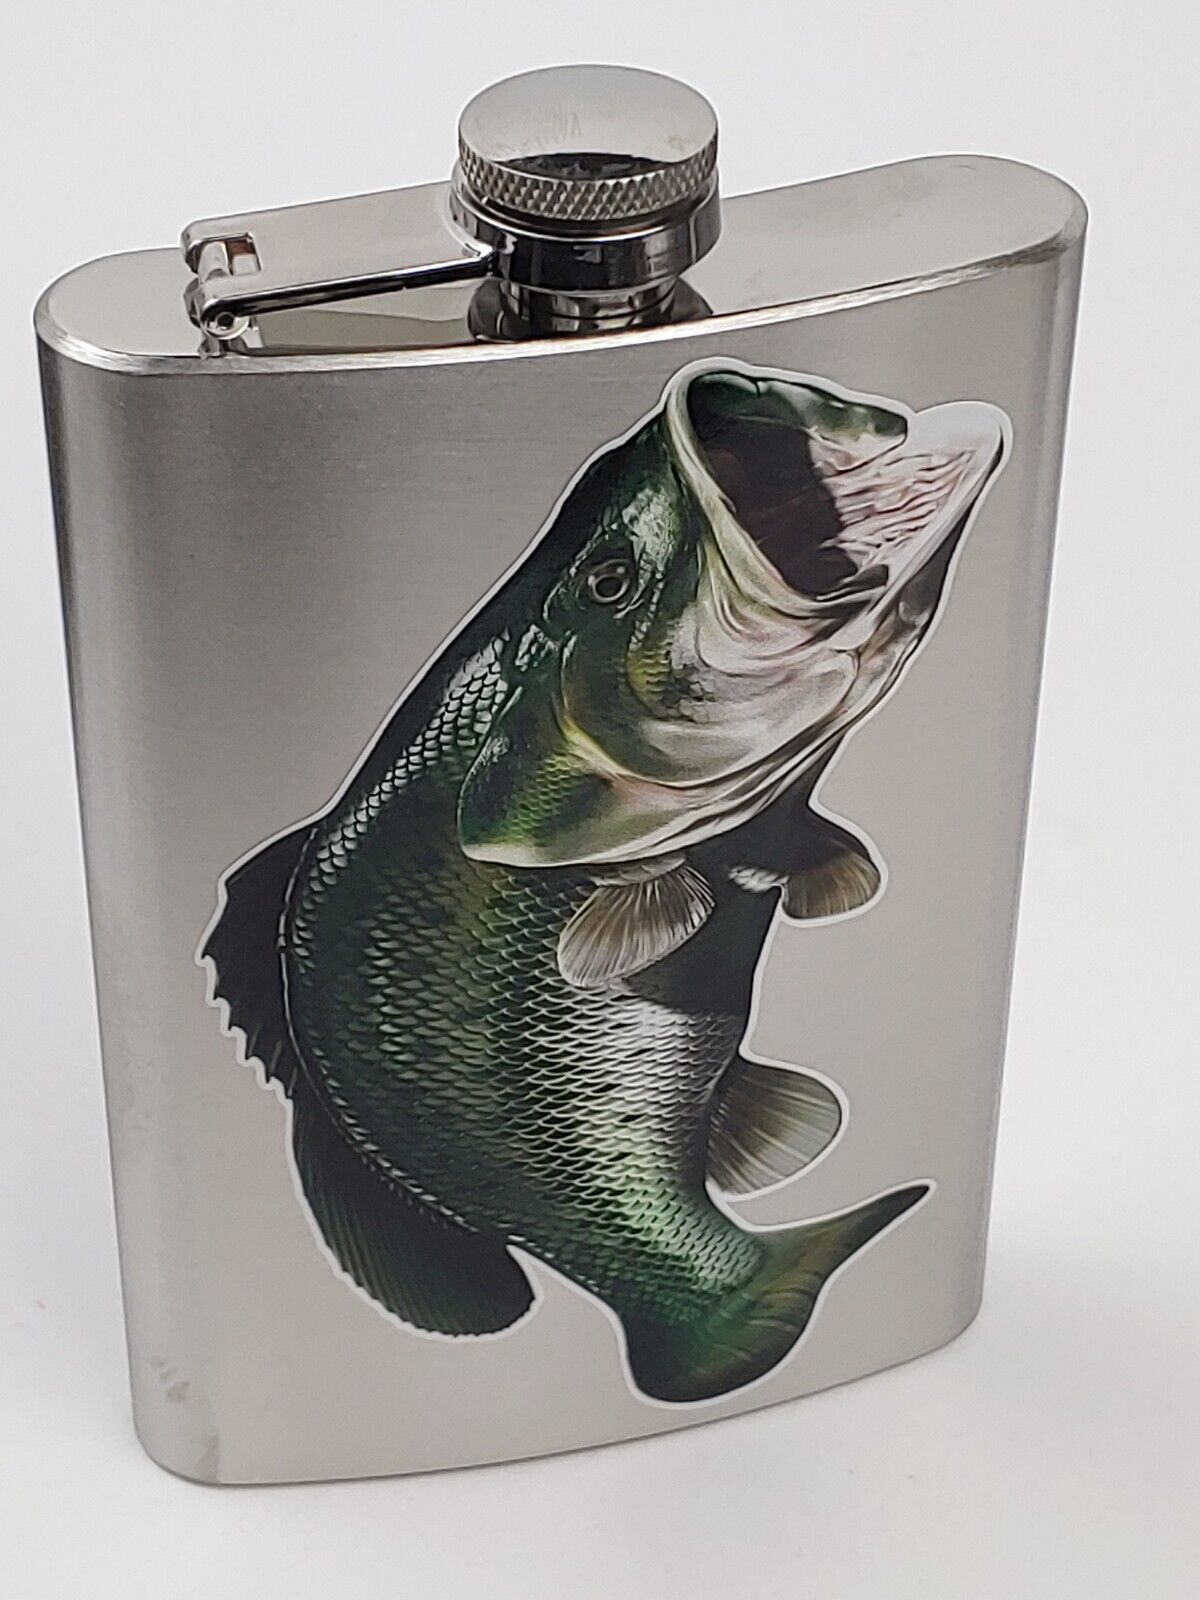 8oz Brushed Stainless Steel Flask W/ Photo-realistic Large Mouth Bass Fish Decal